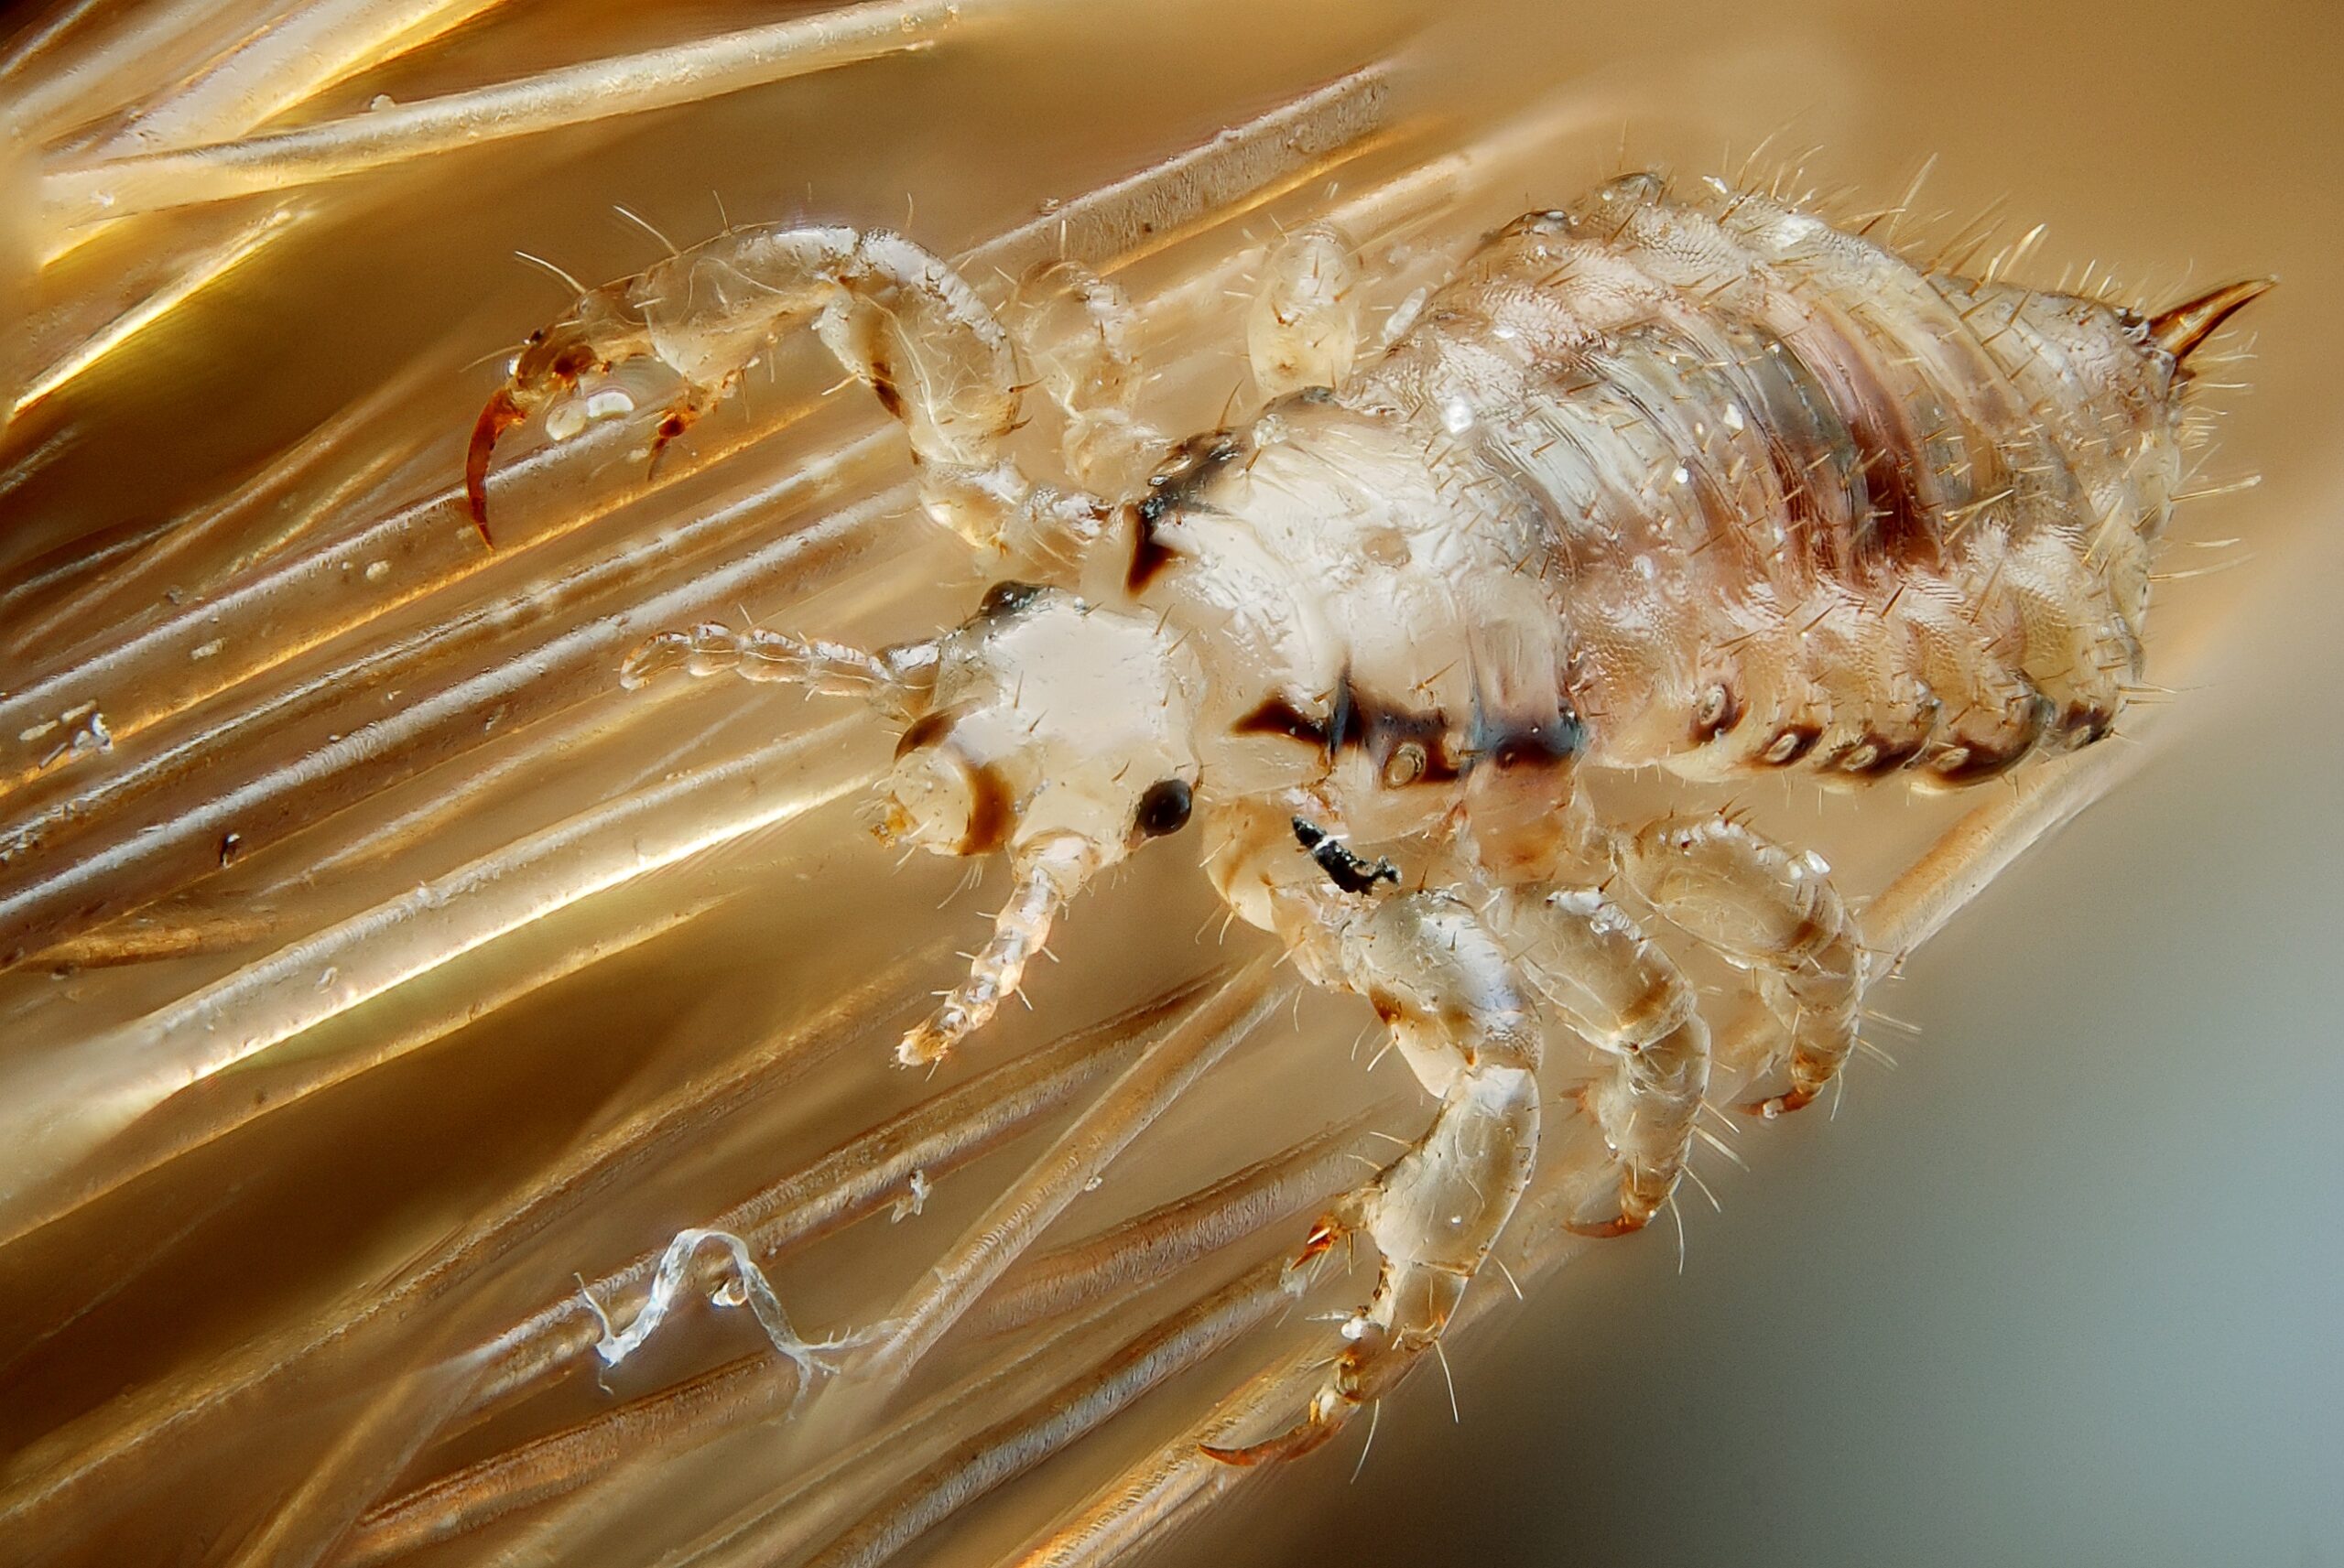 What Are Tips To Check For Lice On Yourself?